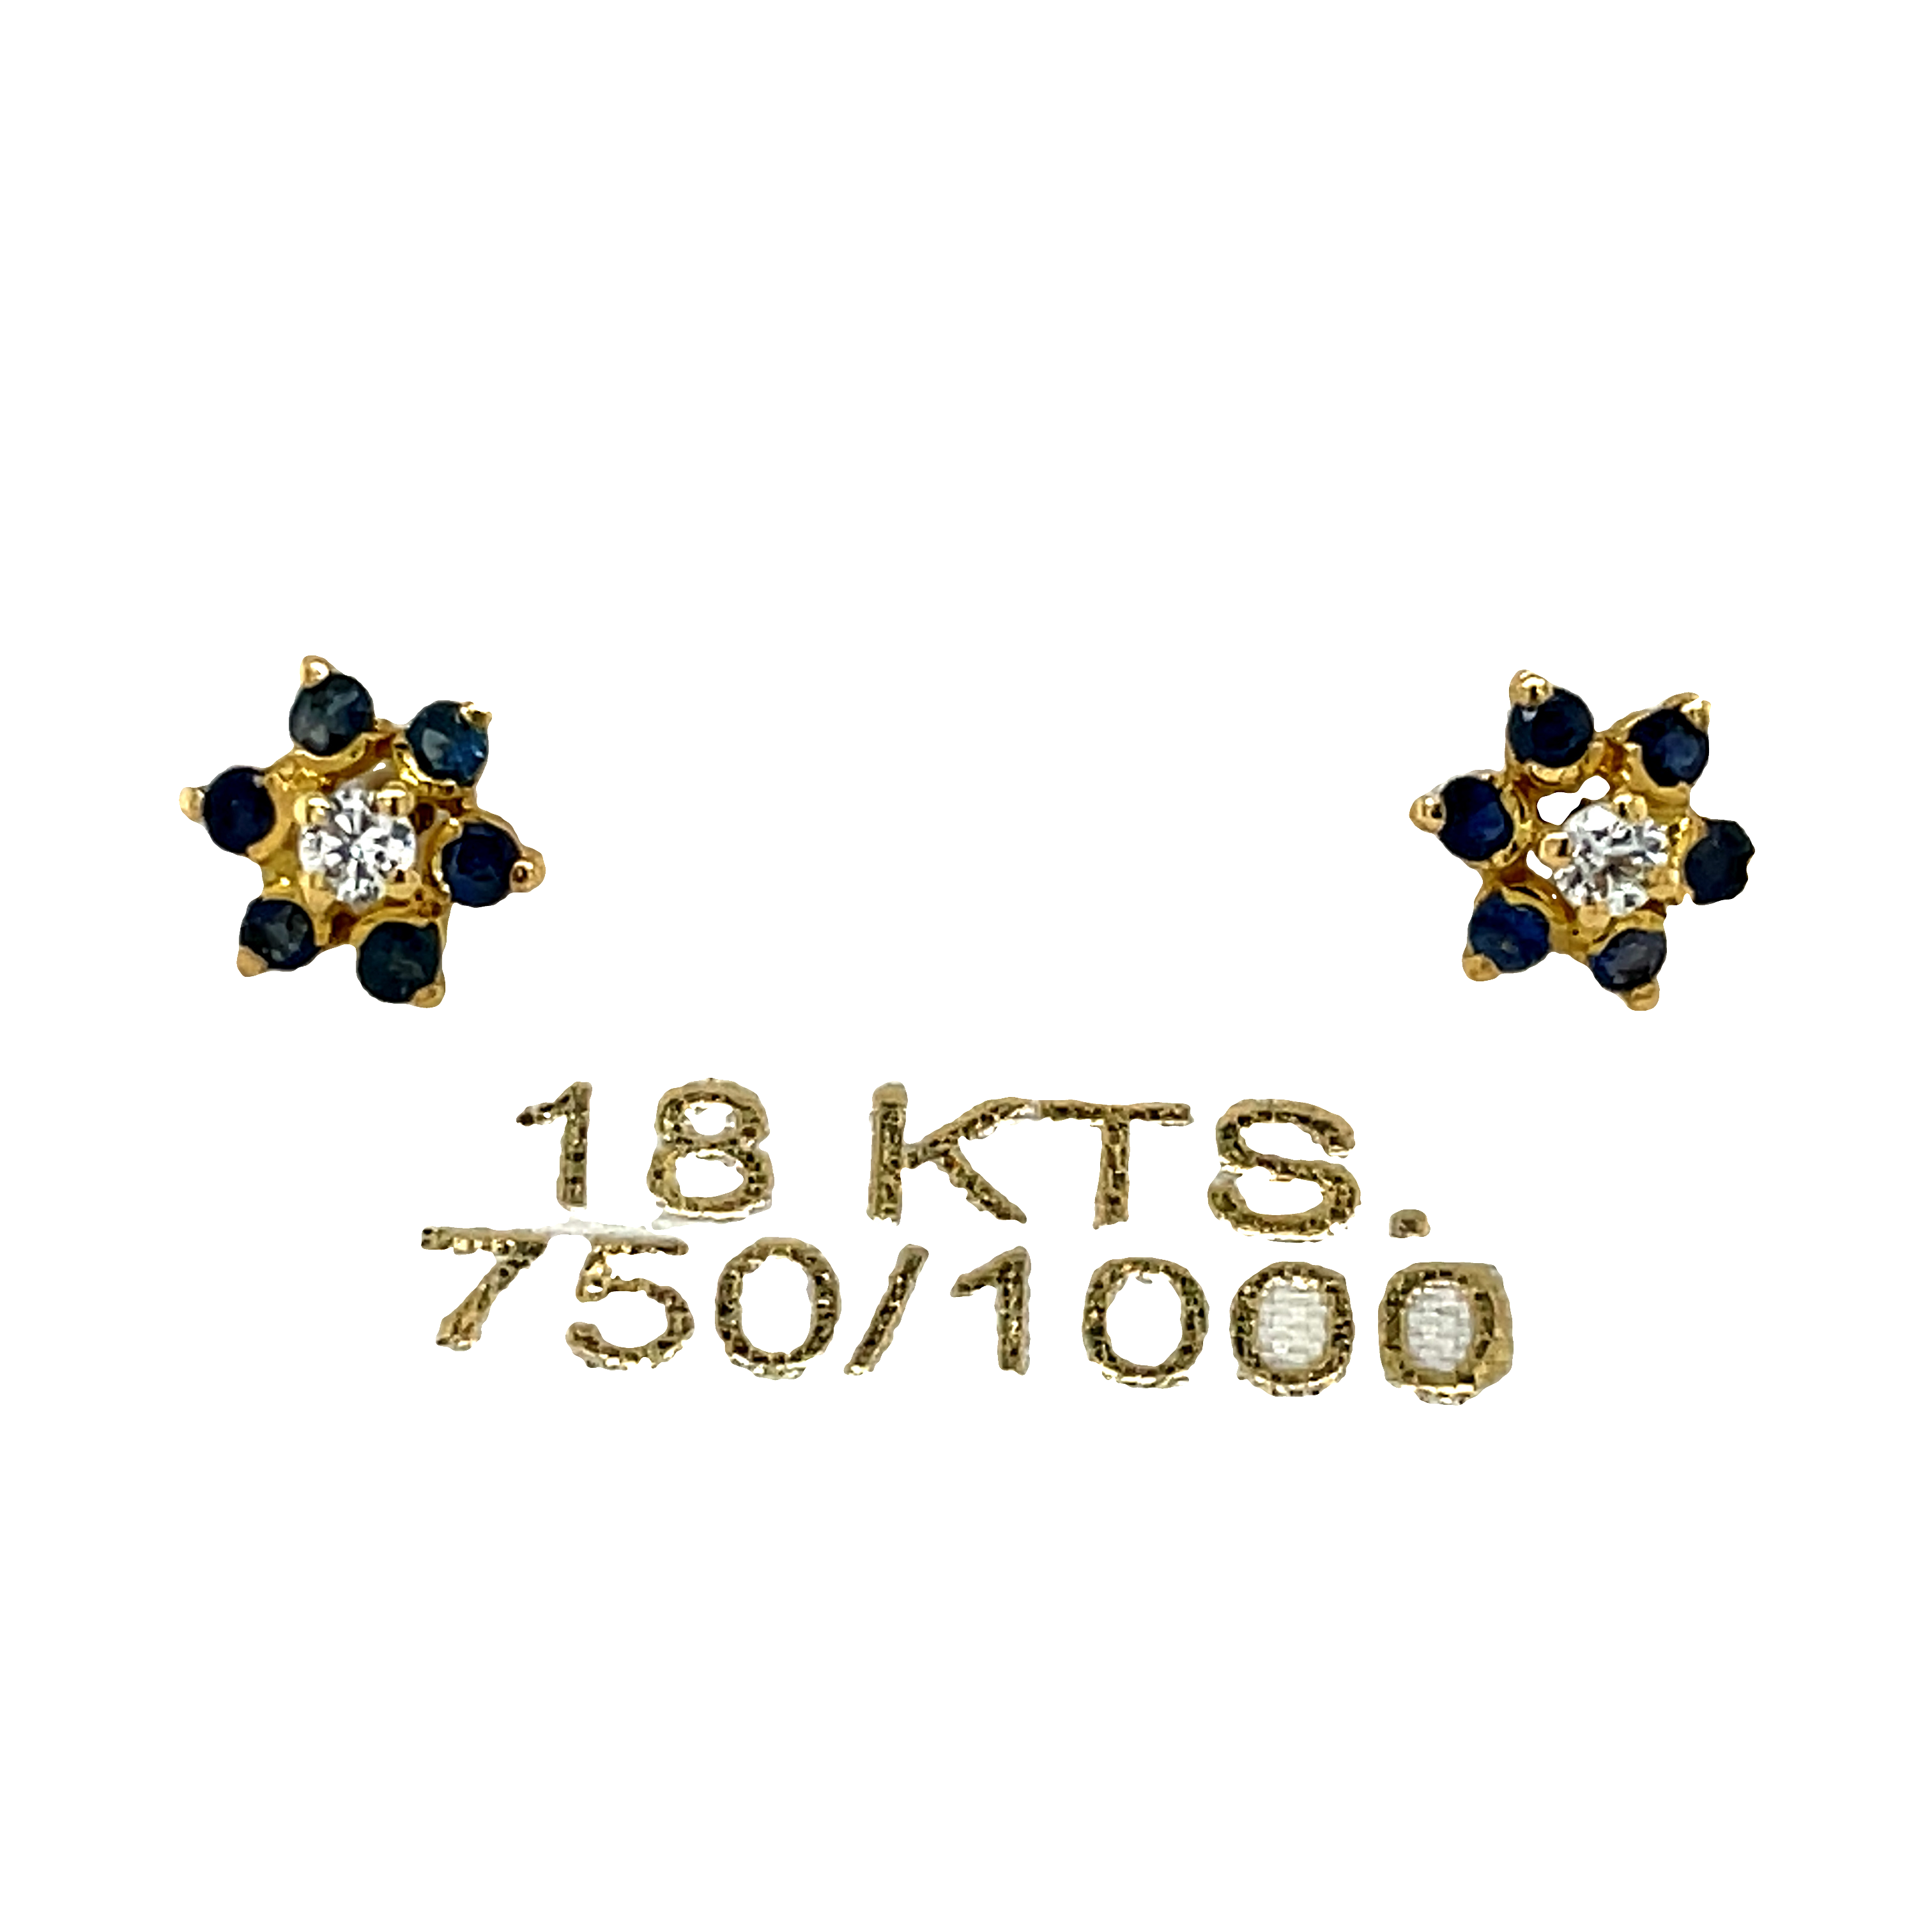 Beautiful baby earrings  Secure baby screw backs  18k yellow gold  Small round sapphires & diamonds